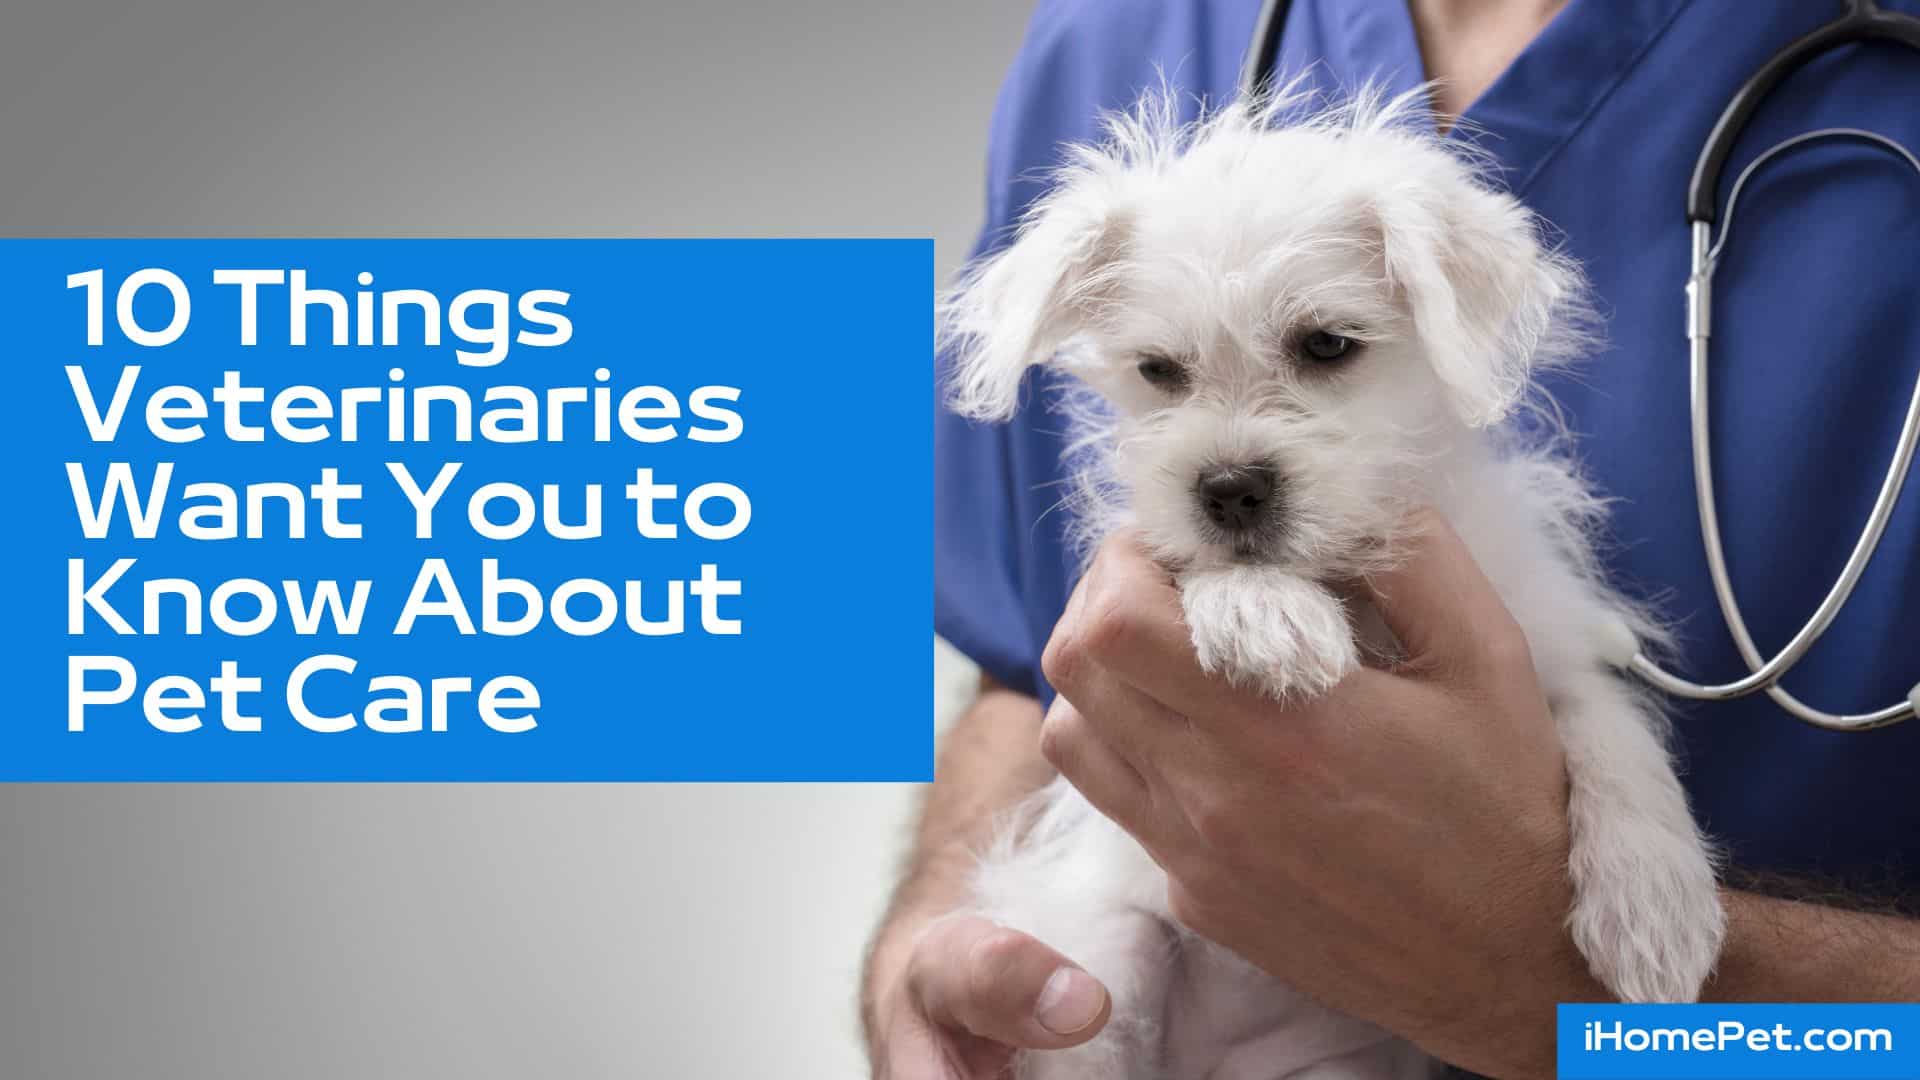 Bring your pet home from a vet visit with quality care and good veterinary practices